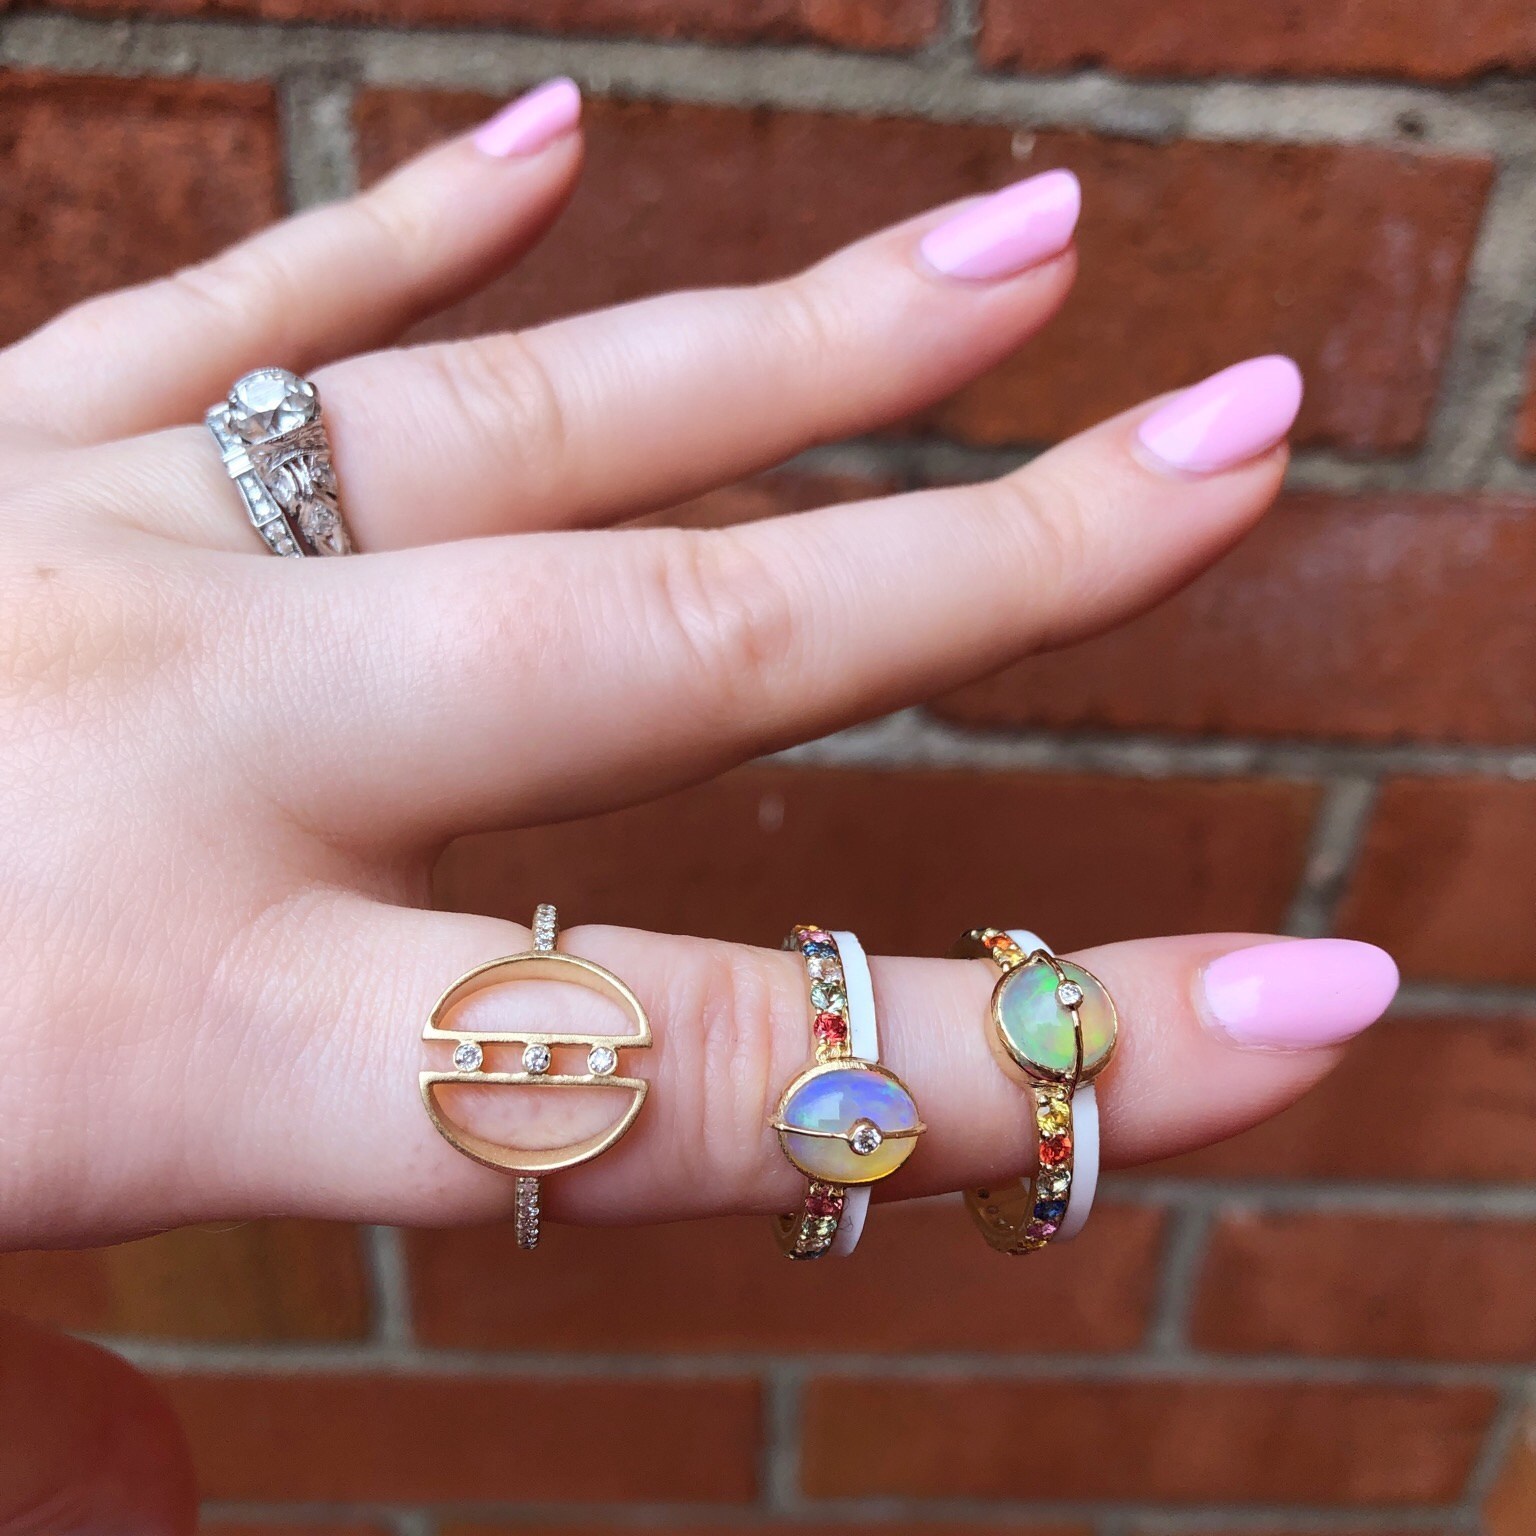 Stunning rings from Loriann Jewelry's latest collections! Diamonds, opals, rainbow sapphires, and white enamel on gold.